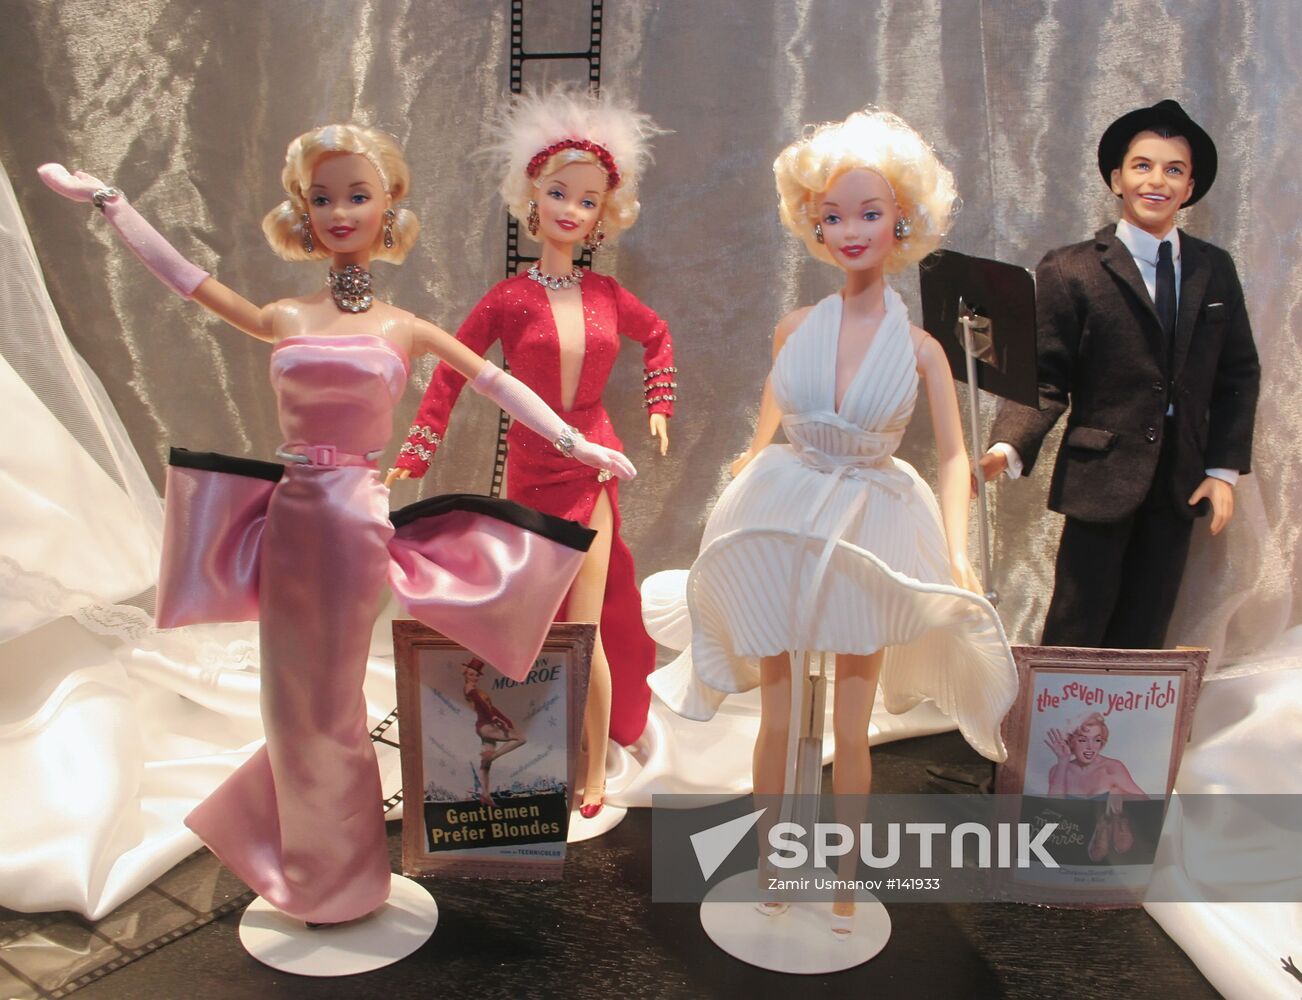 EXHIBITION "THE FASCINATING BARBIE WORLD. THE LEGEND OF A DOLL"